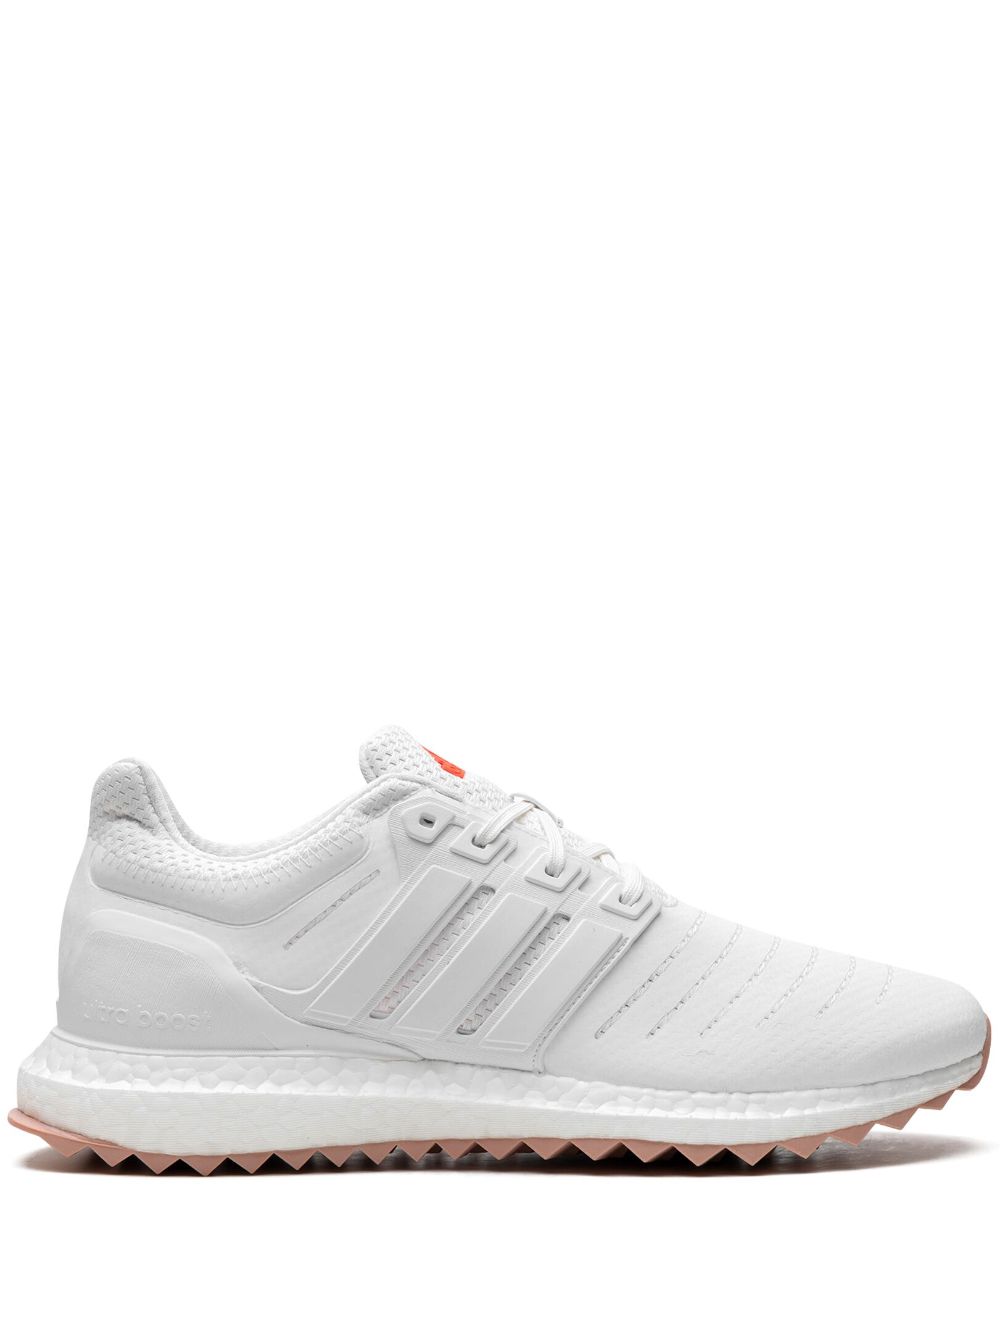 Adidas Ultraboost DNA XXII "Non Dyed Bright Red" sneakers White